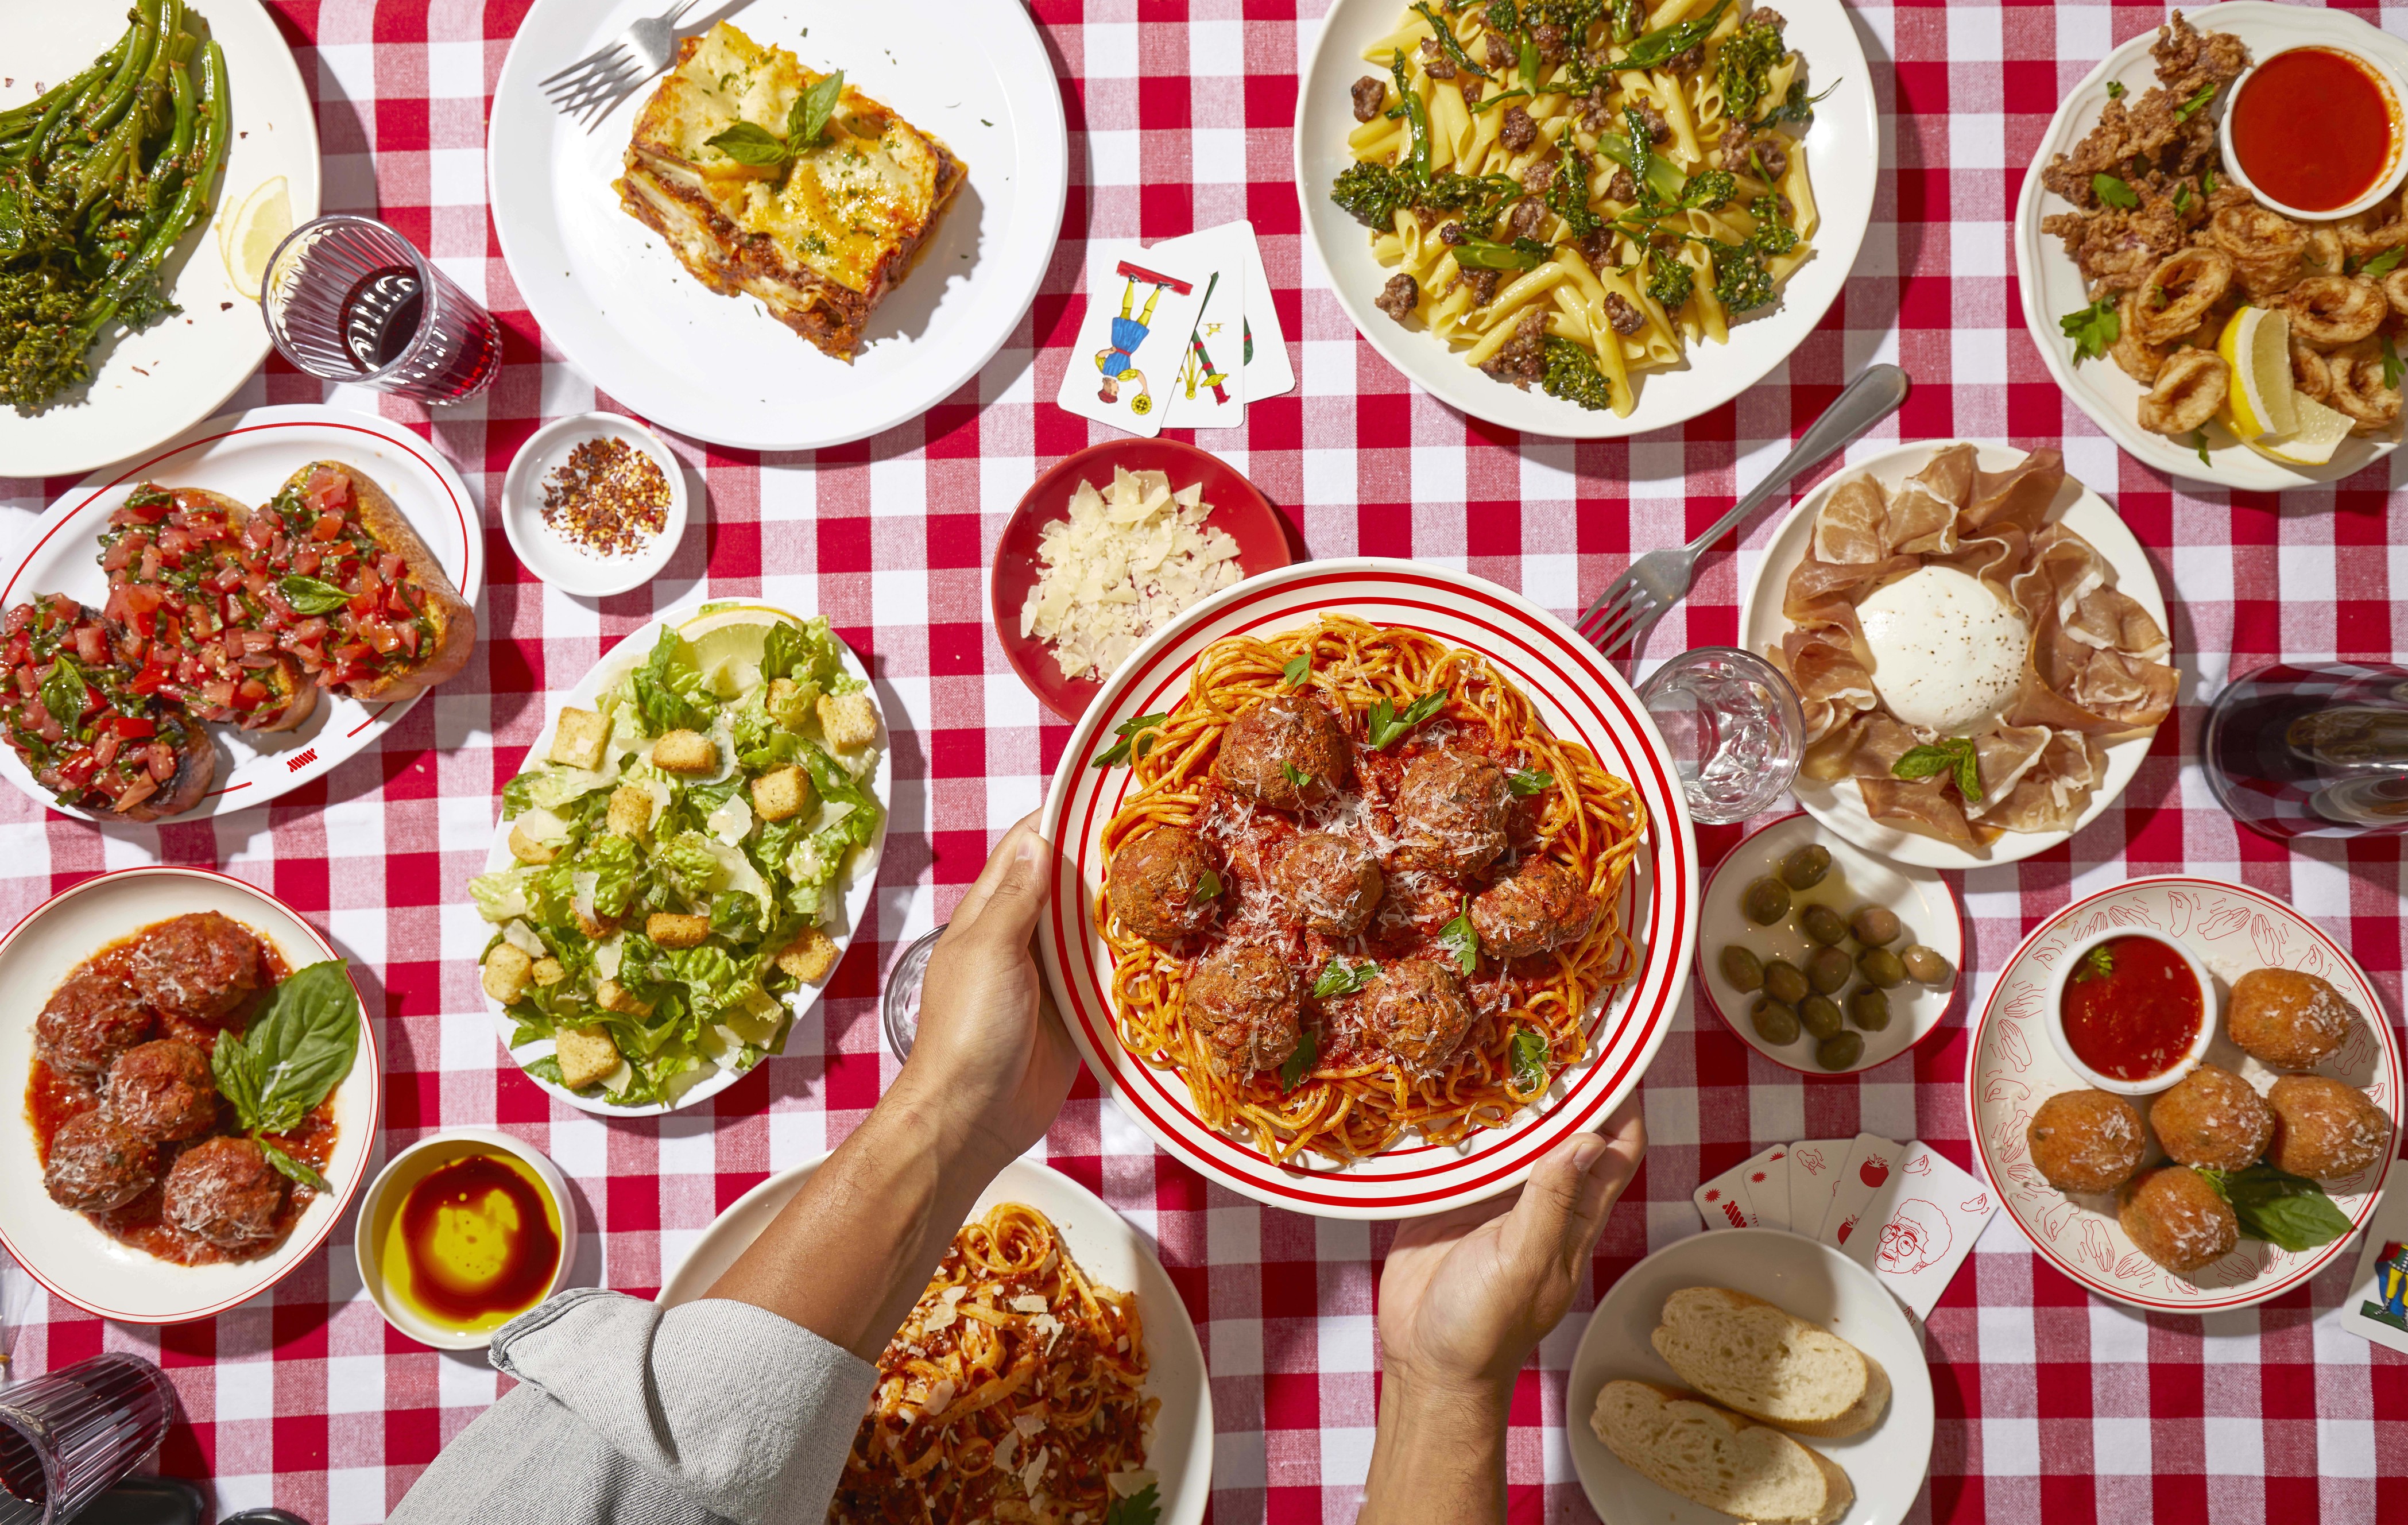 Image of various pastas, bruschetta, meatballs, salads, prosciutto, and wine on a red and white traditional table cloth